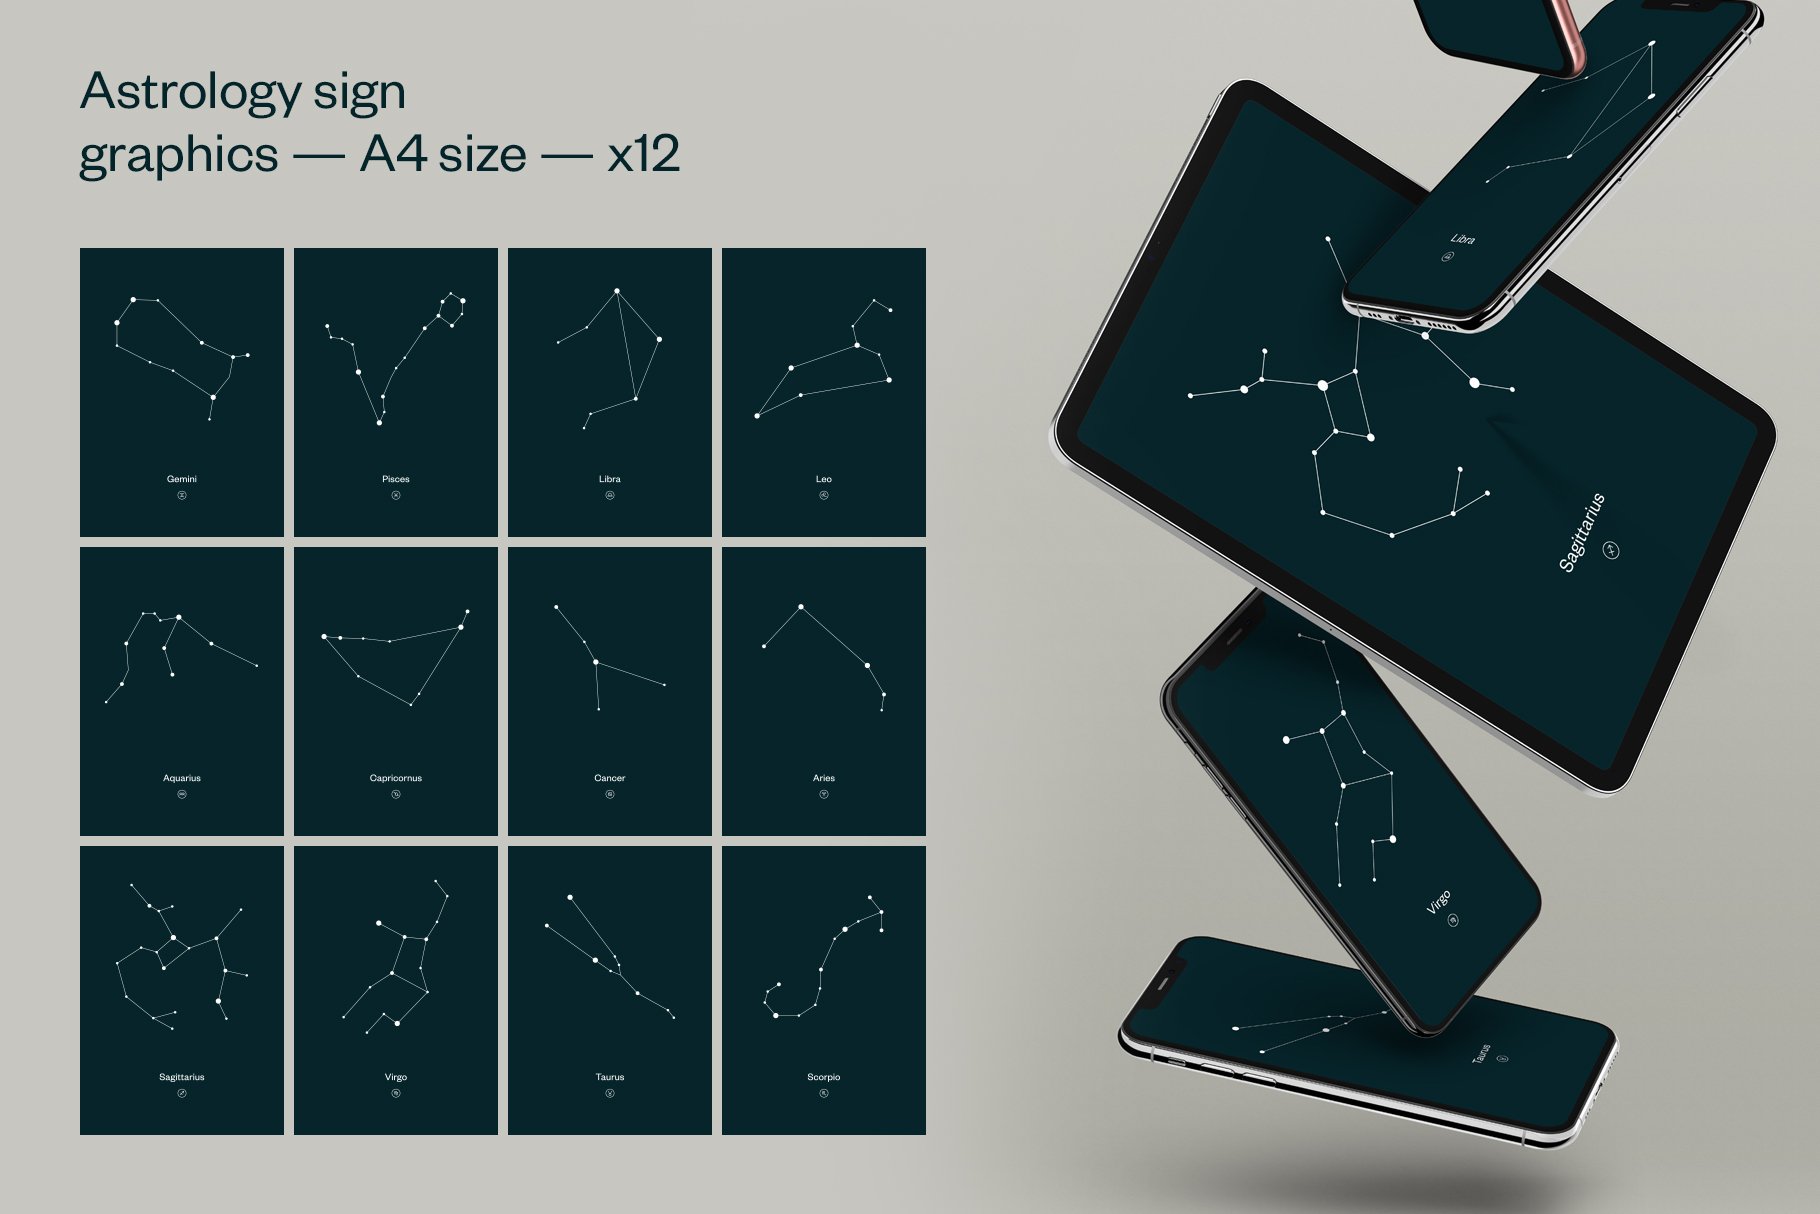 Astrology signs patterns on a dark background.